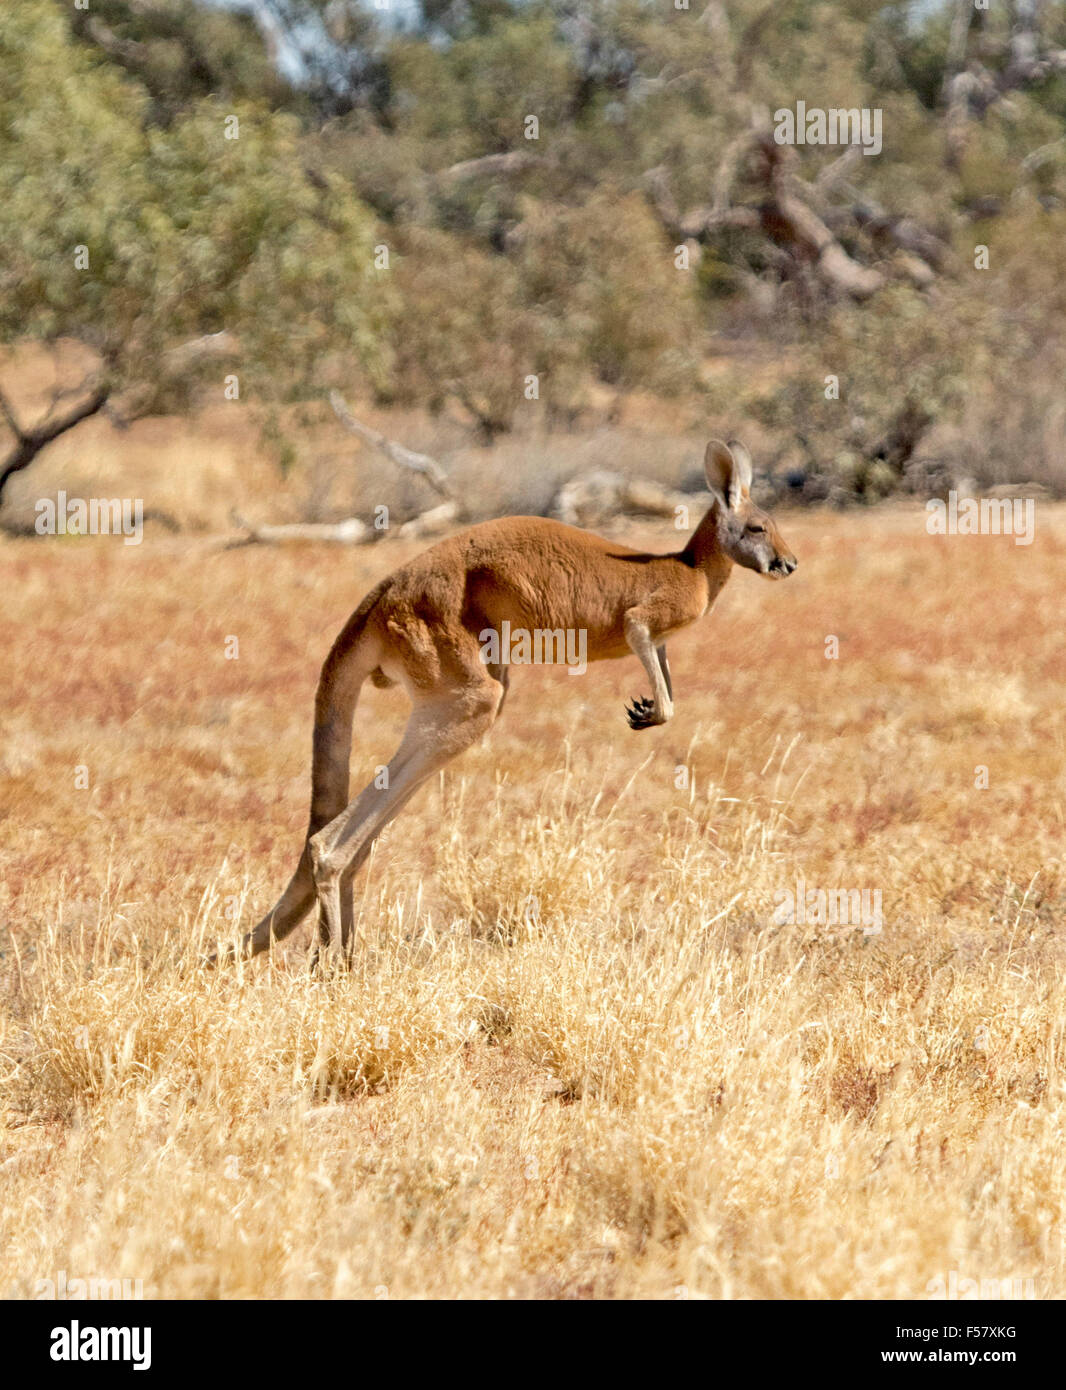 Large male red kangaroo, Macropus rufus, bounding across arid outback landscape of golden grasses with trees in background Stock Photo